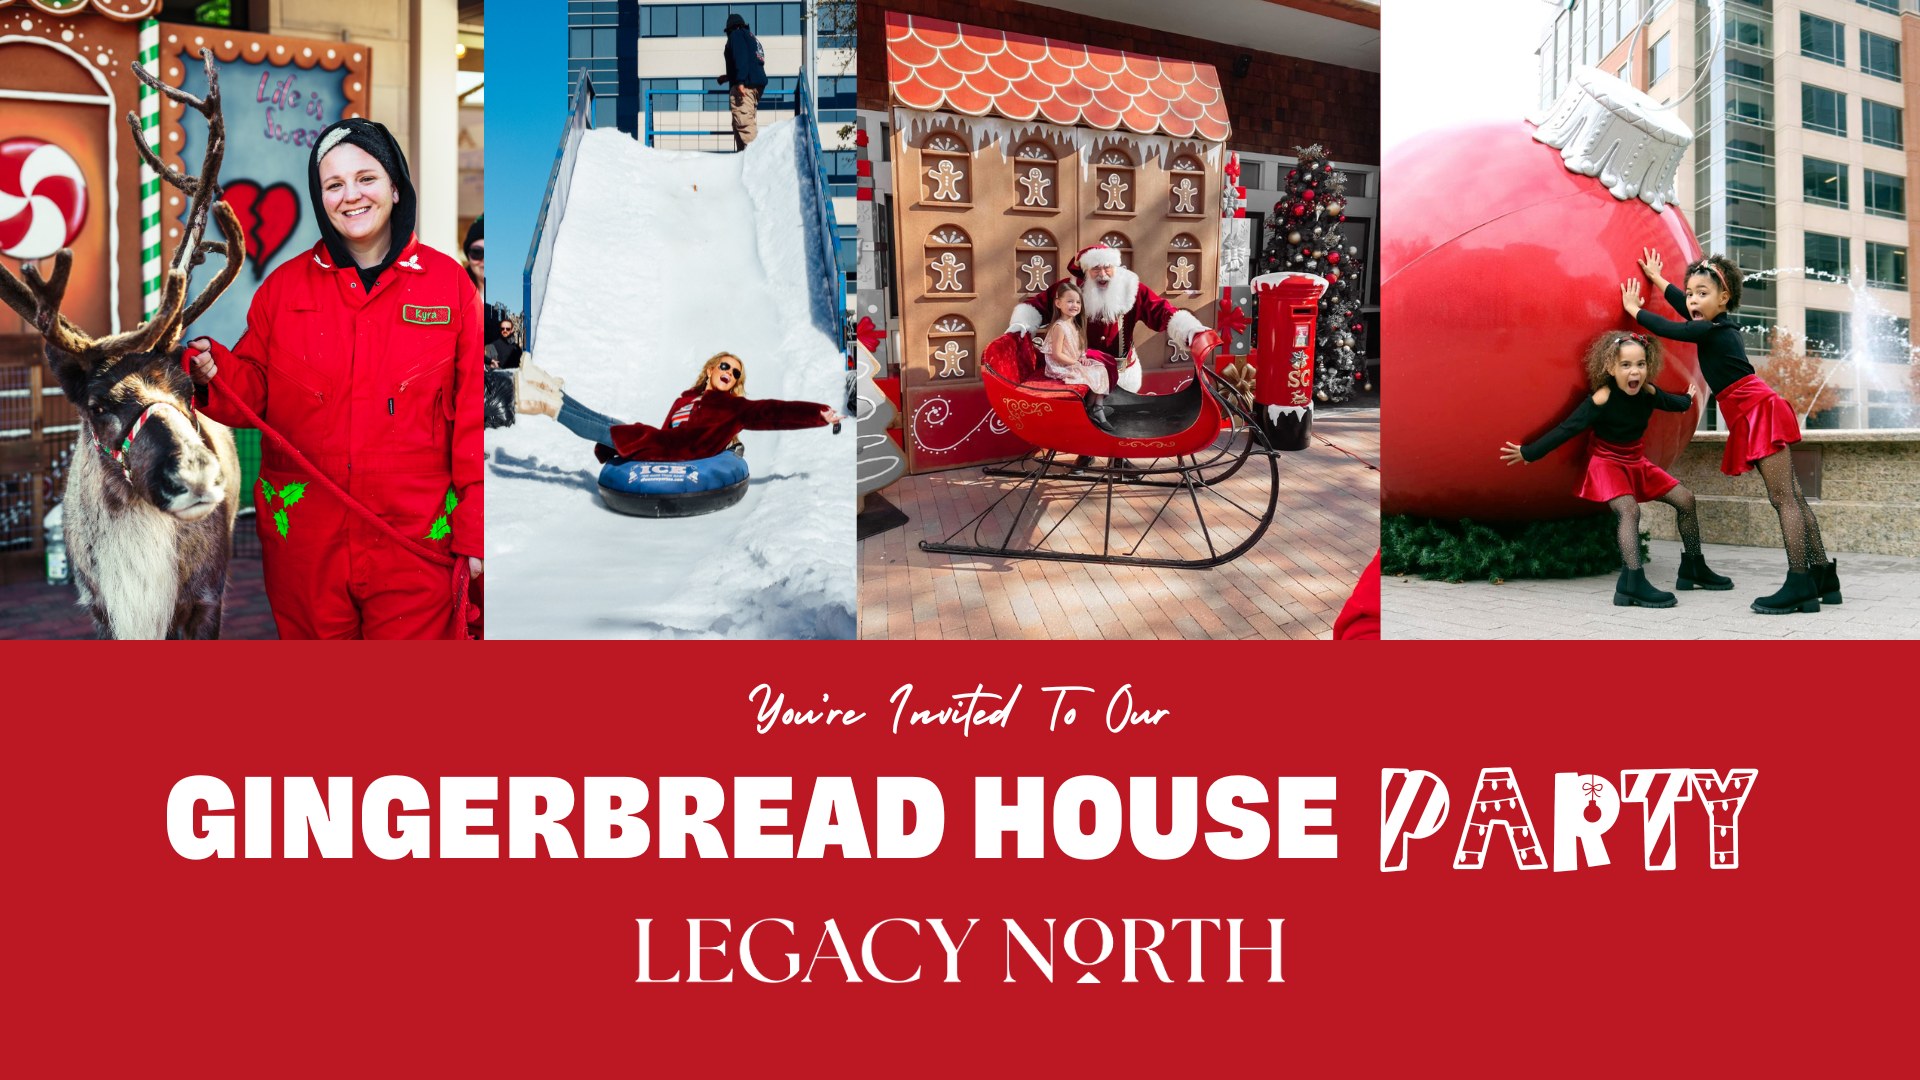 Gingerbread House Party at Legacy North